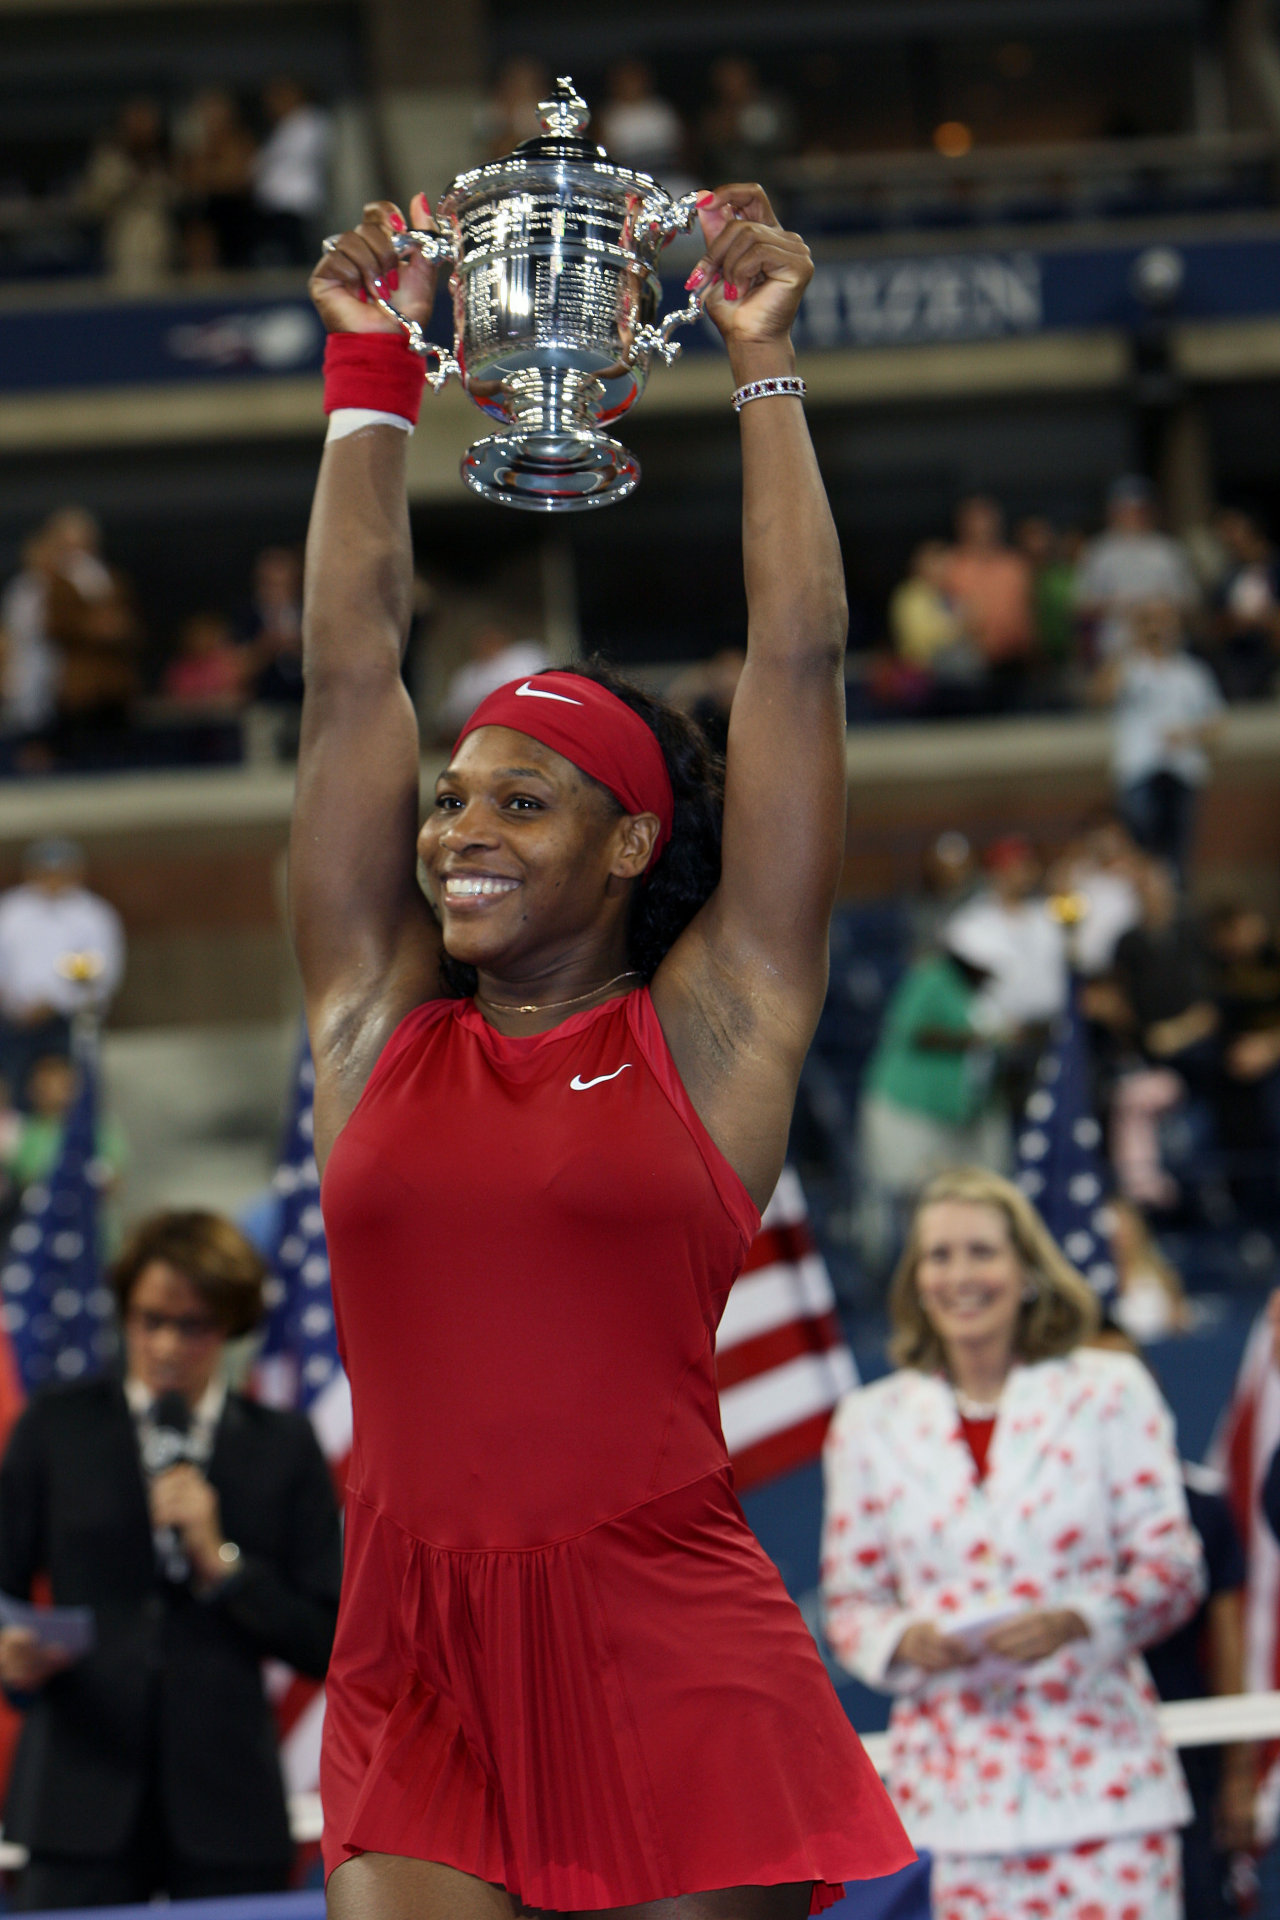 Serena Williams leaked wallpapers